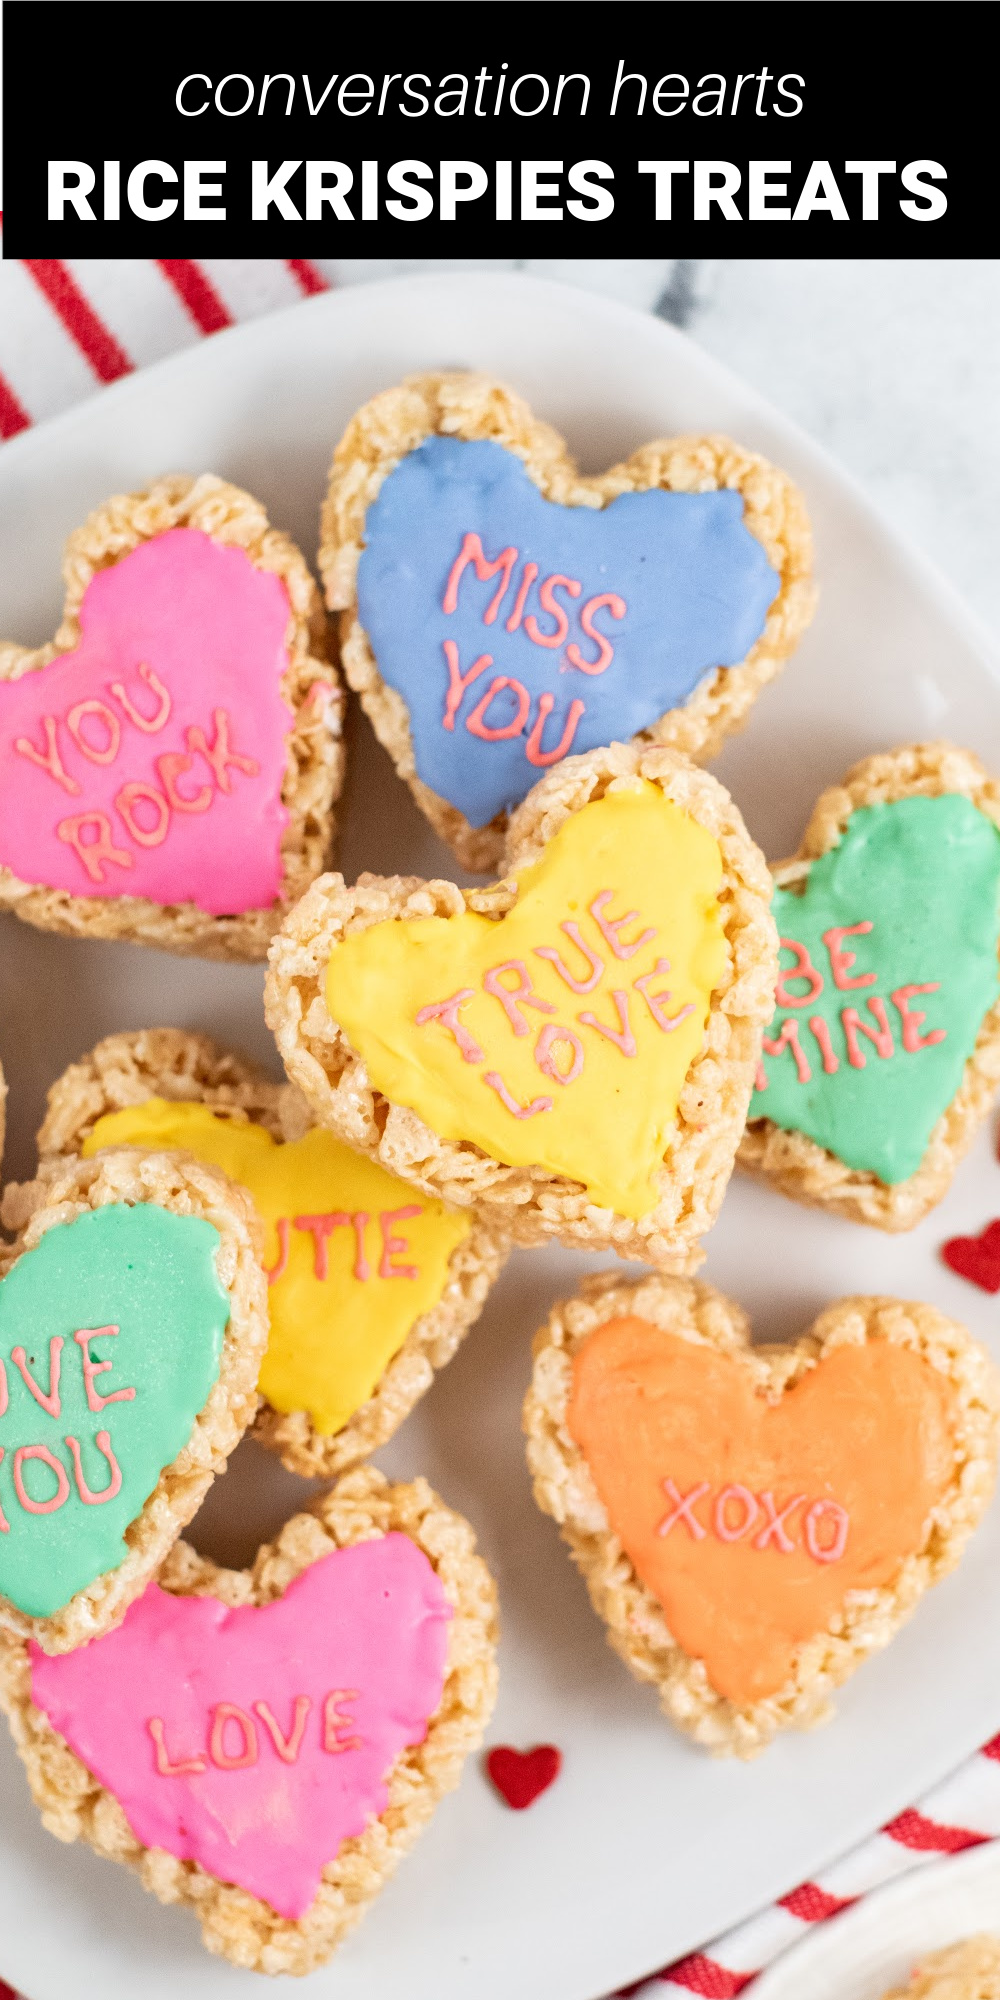 Rice Krispie treat conversation hearts are a fun play on the traditional Valentine's Day candy. Rice Krispie cereal is added to melted marshmallows and butter then topped with colorful white chocolate to make a delicious chewy and sweet treat!